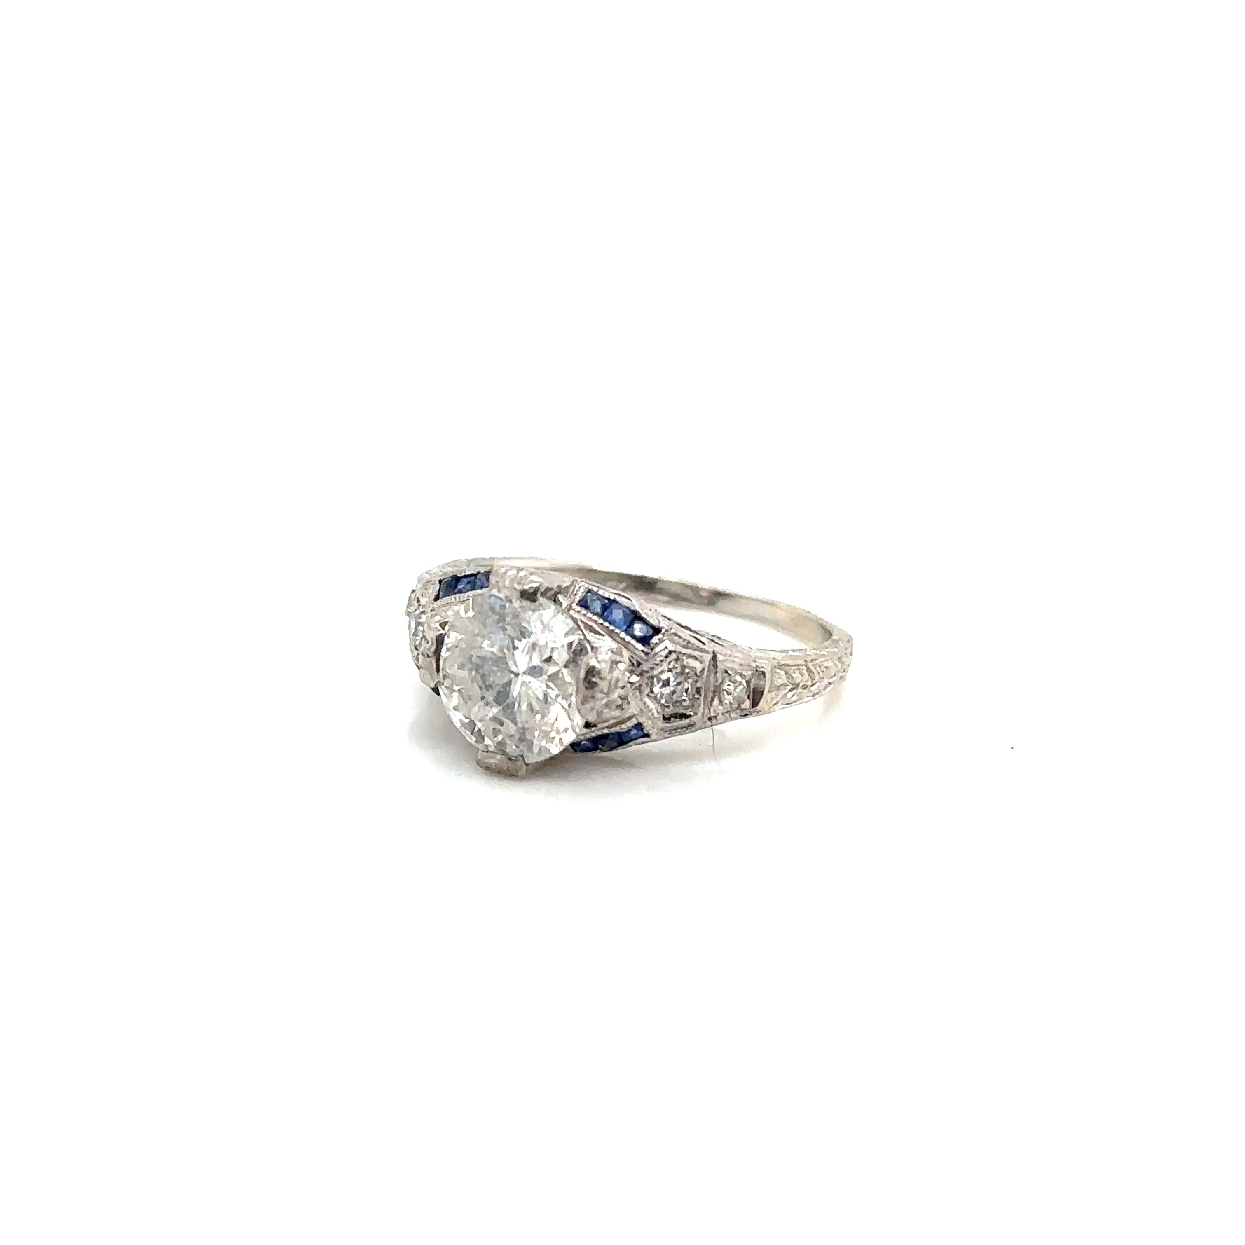 Platinum Art Deco (1920s) Transitional Cut Diamond (1940s) Ring with Channel Set Sapphire Accents and Filigree Details Size 5